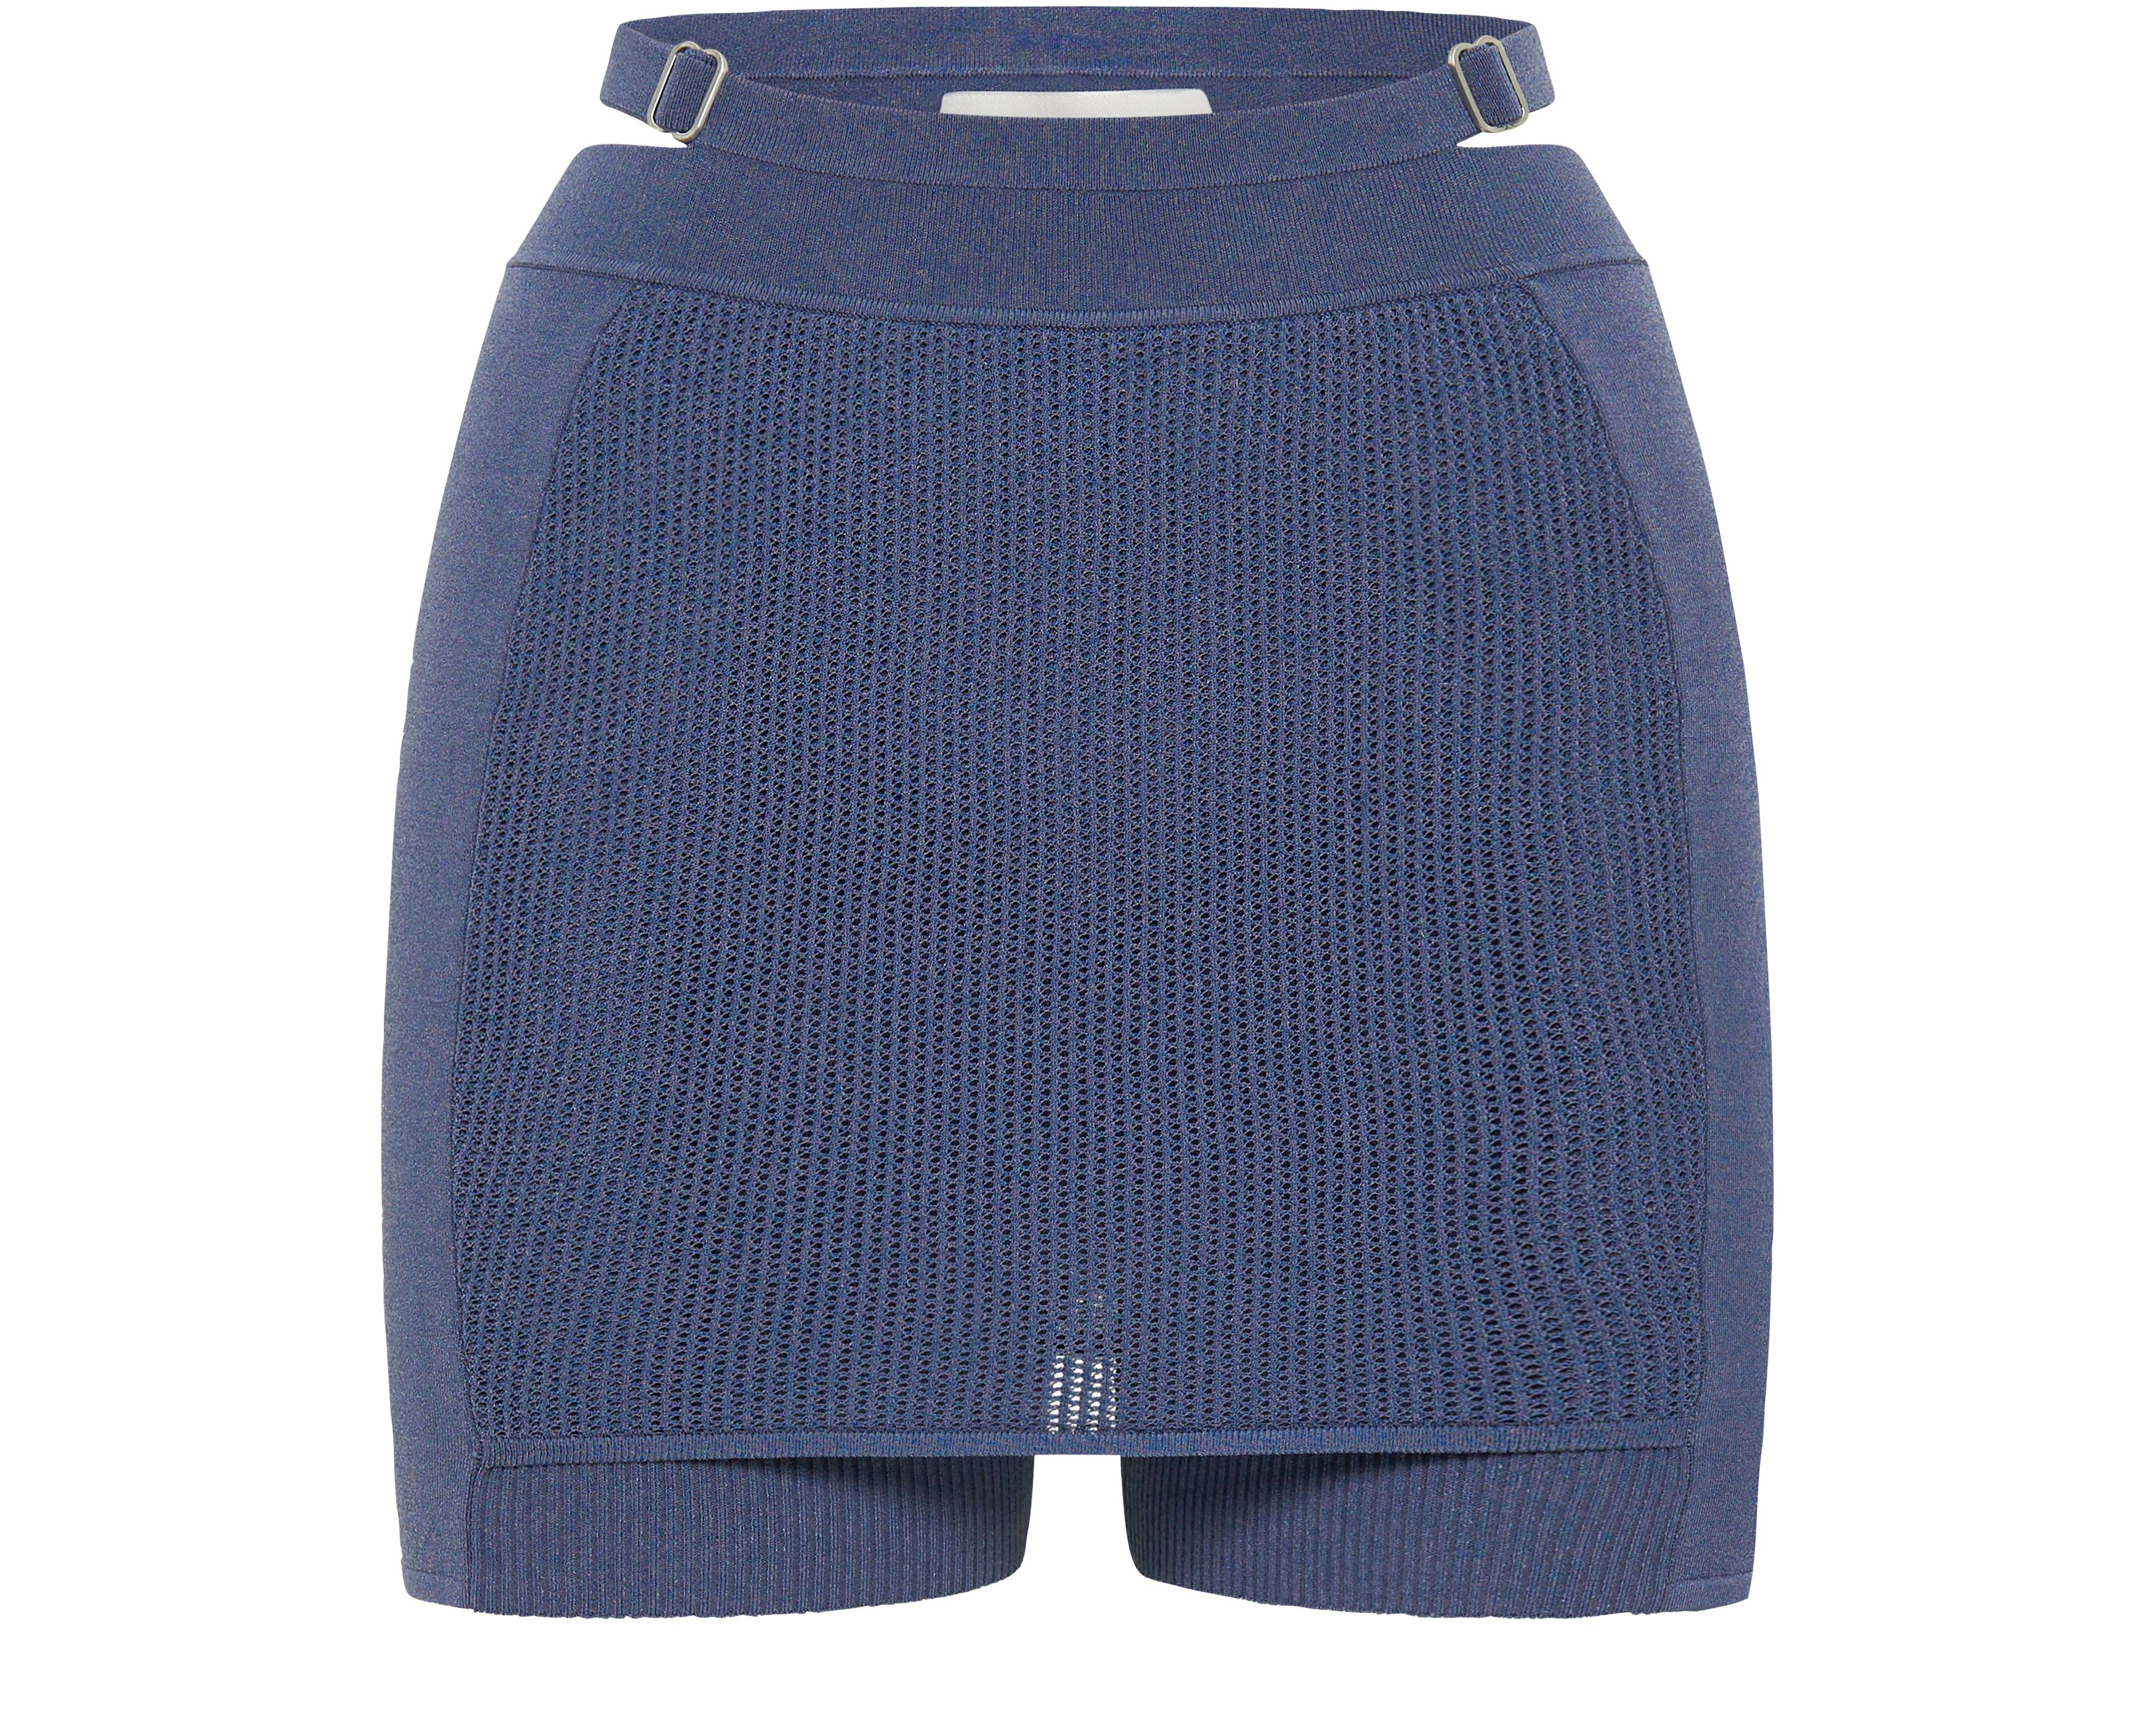 Dion Lee Helix Mesh Shorts